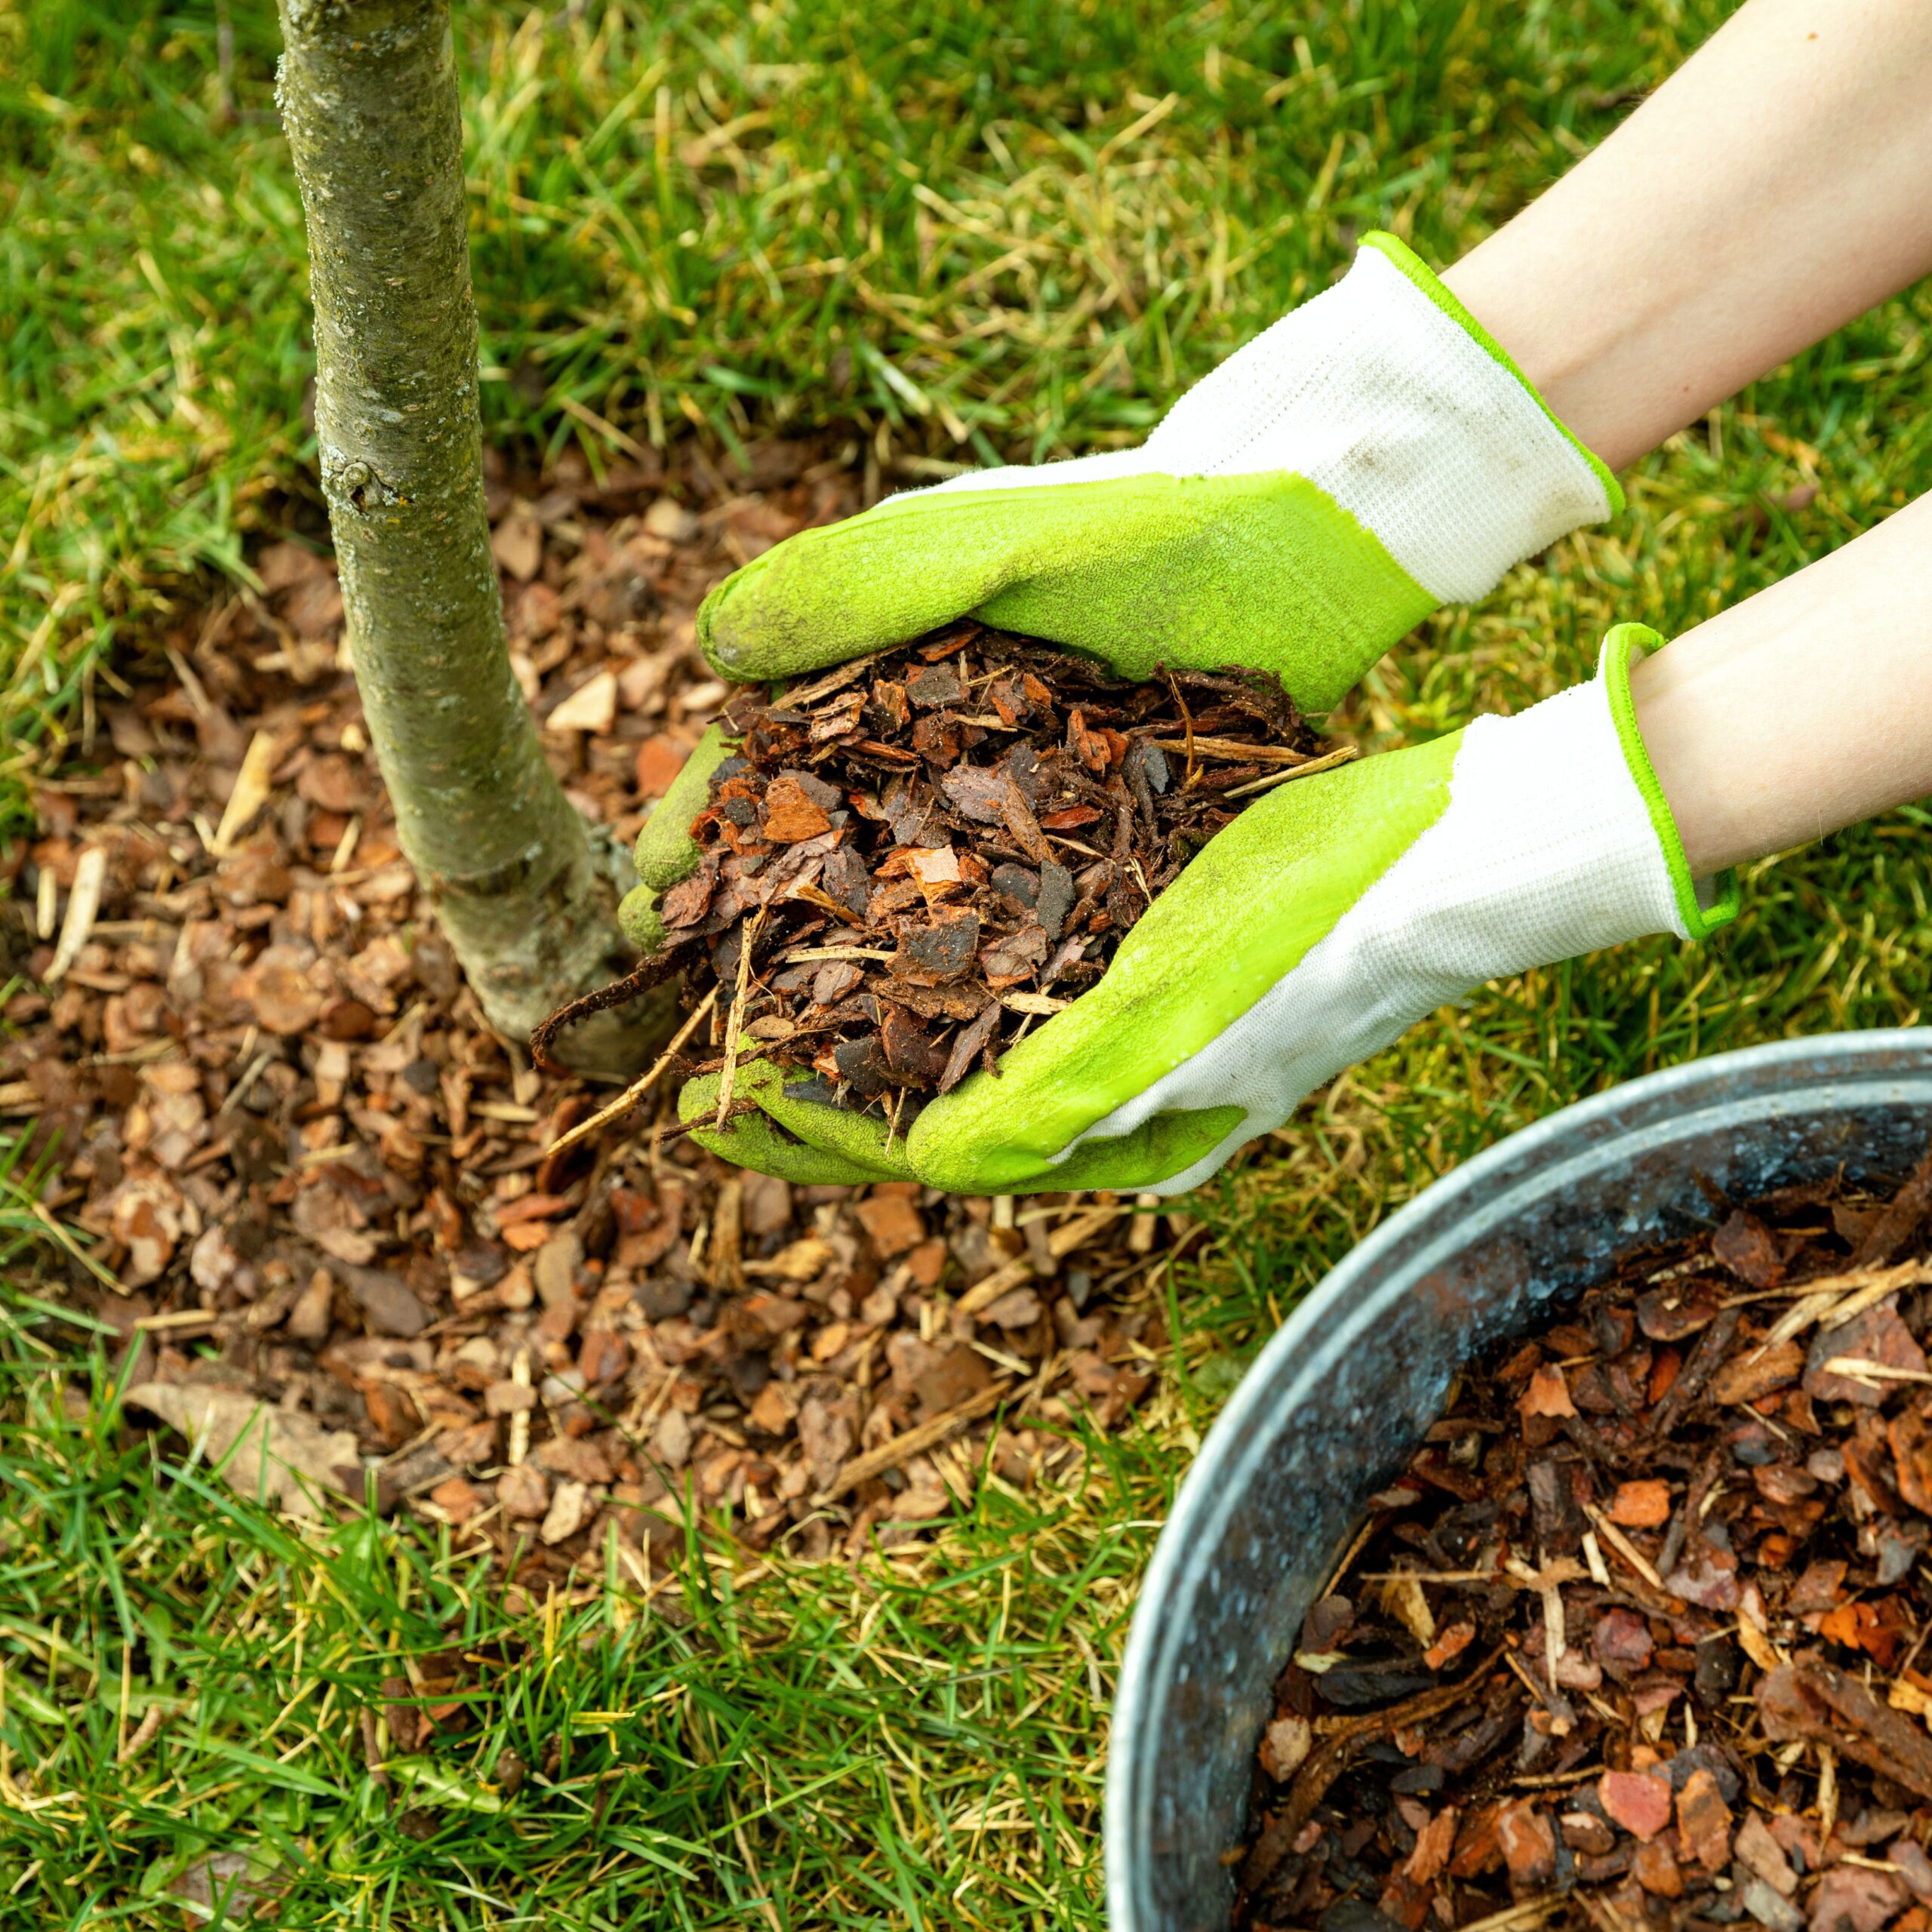 RAIN DATE ACTIVATED! Volunteer for Upper Merion Park Partners Spring Tree Weed and Mulch Event